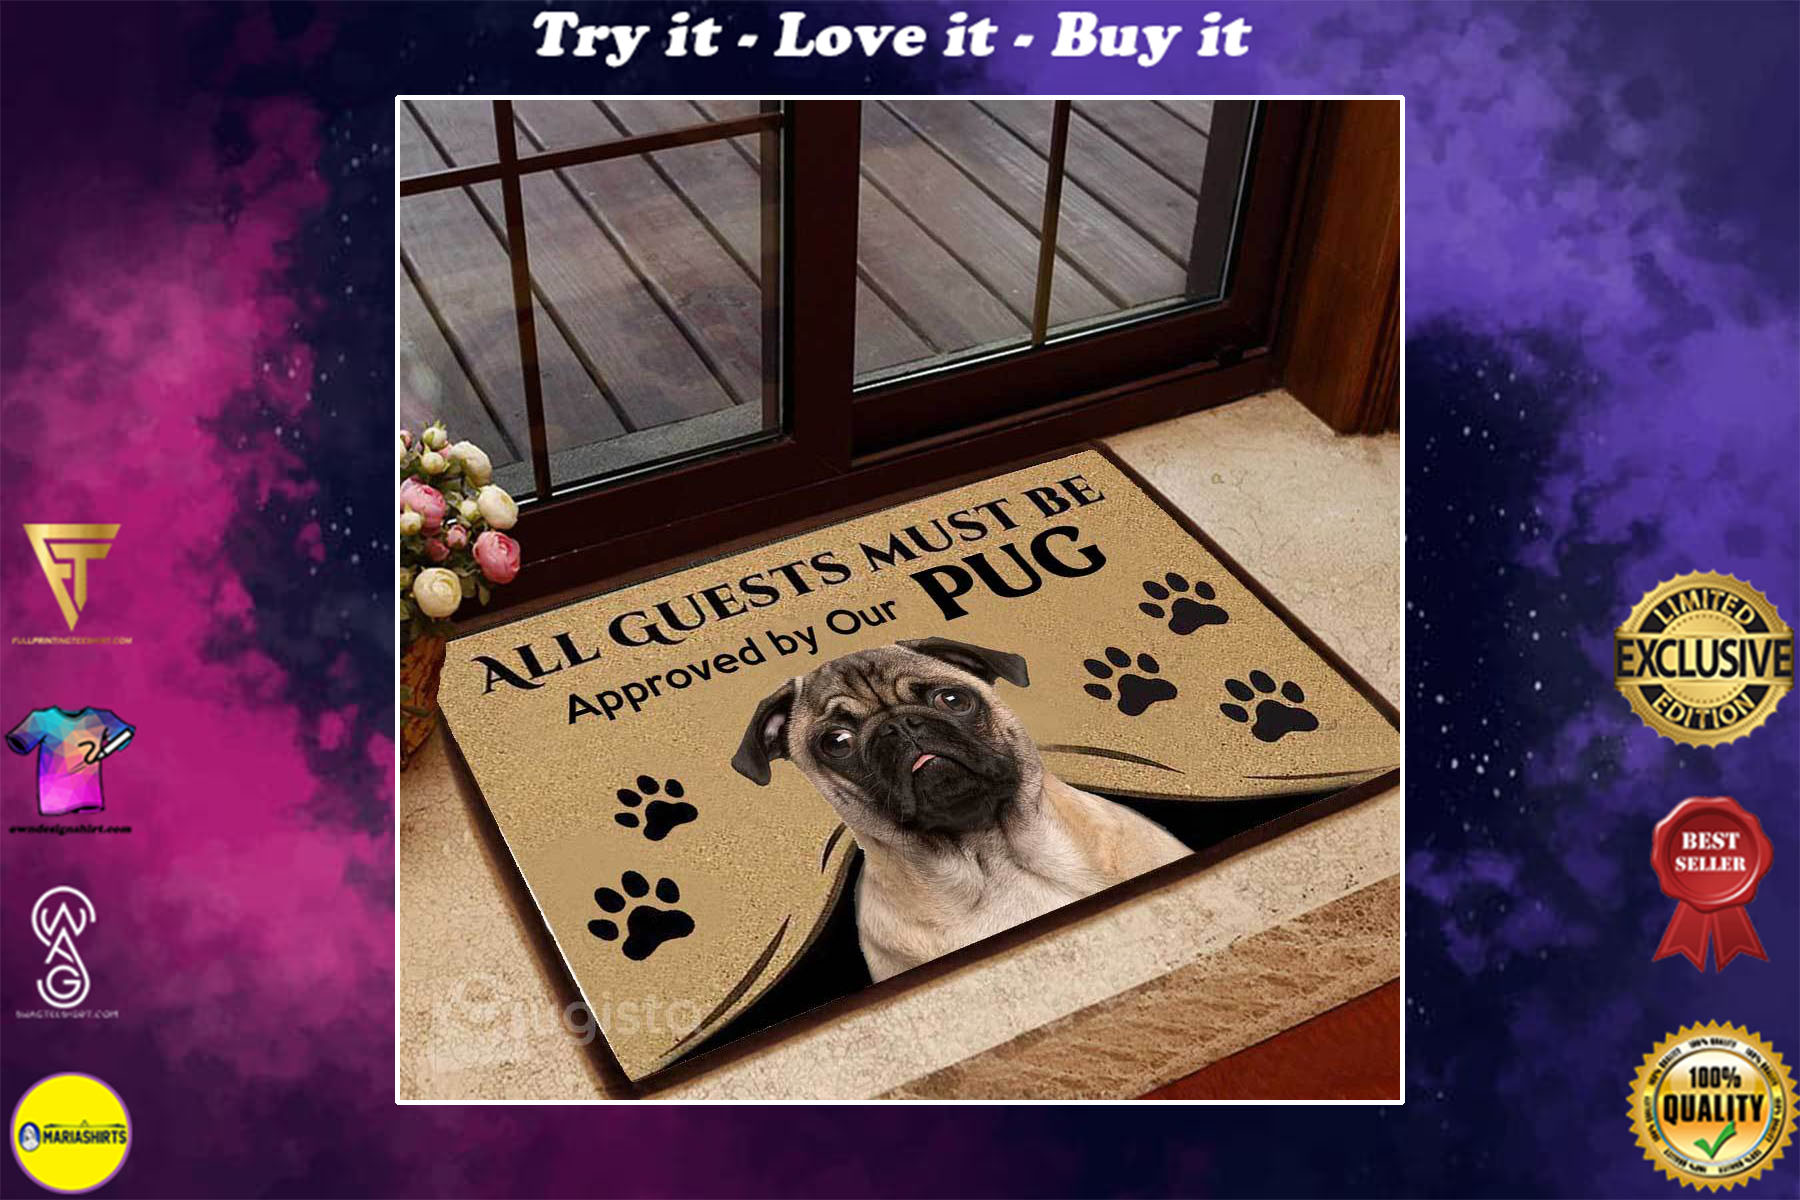 [special edition] all guests must be approved by our pug doormat – maria